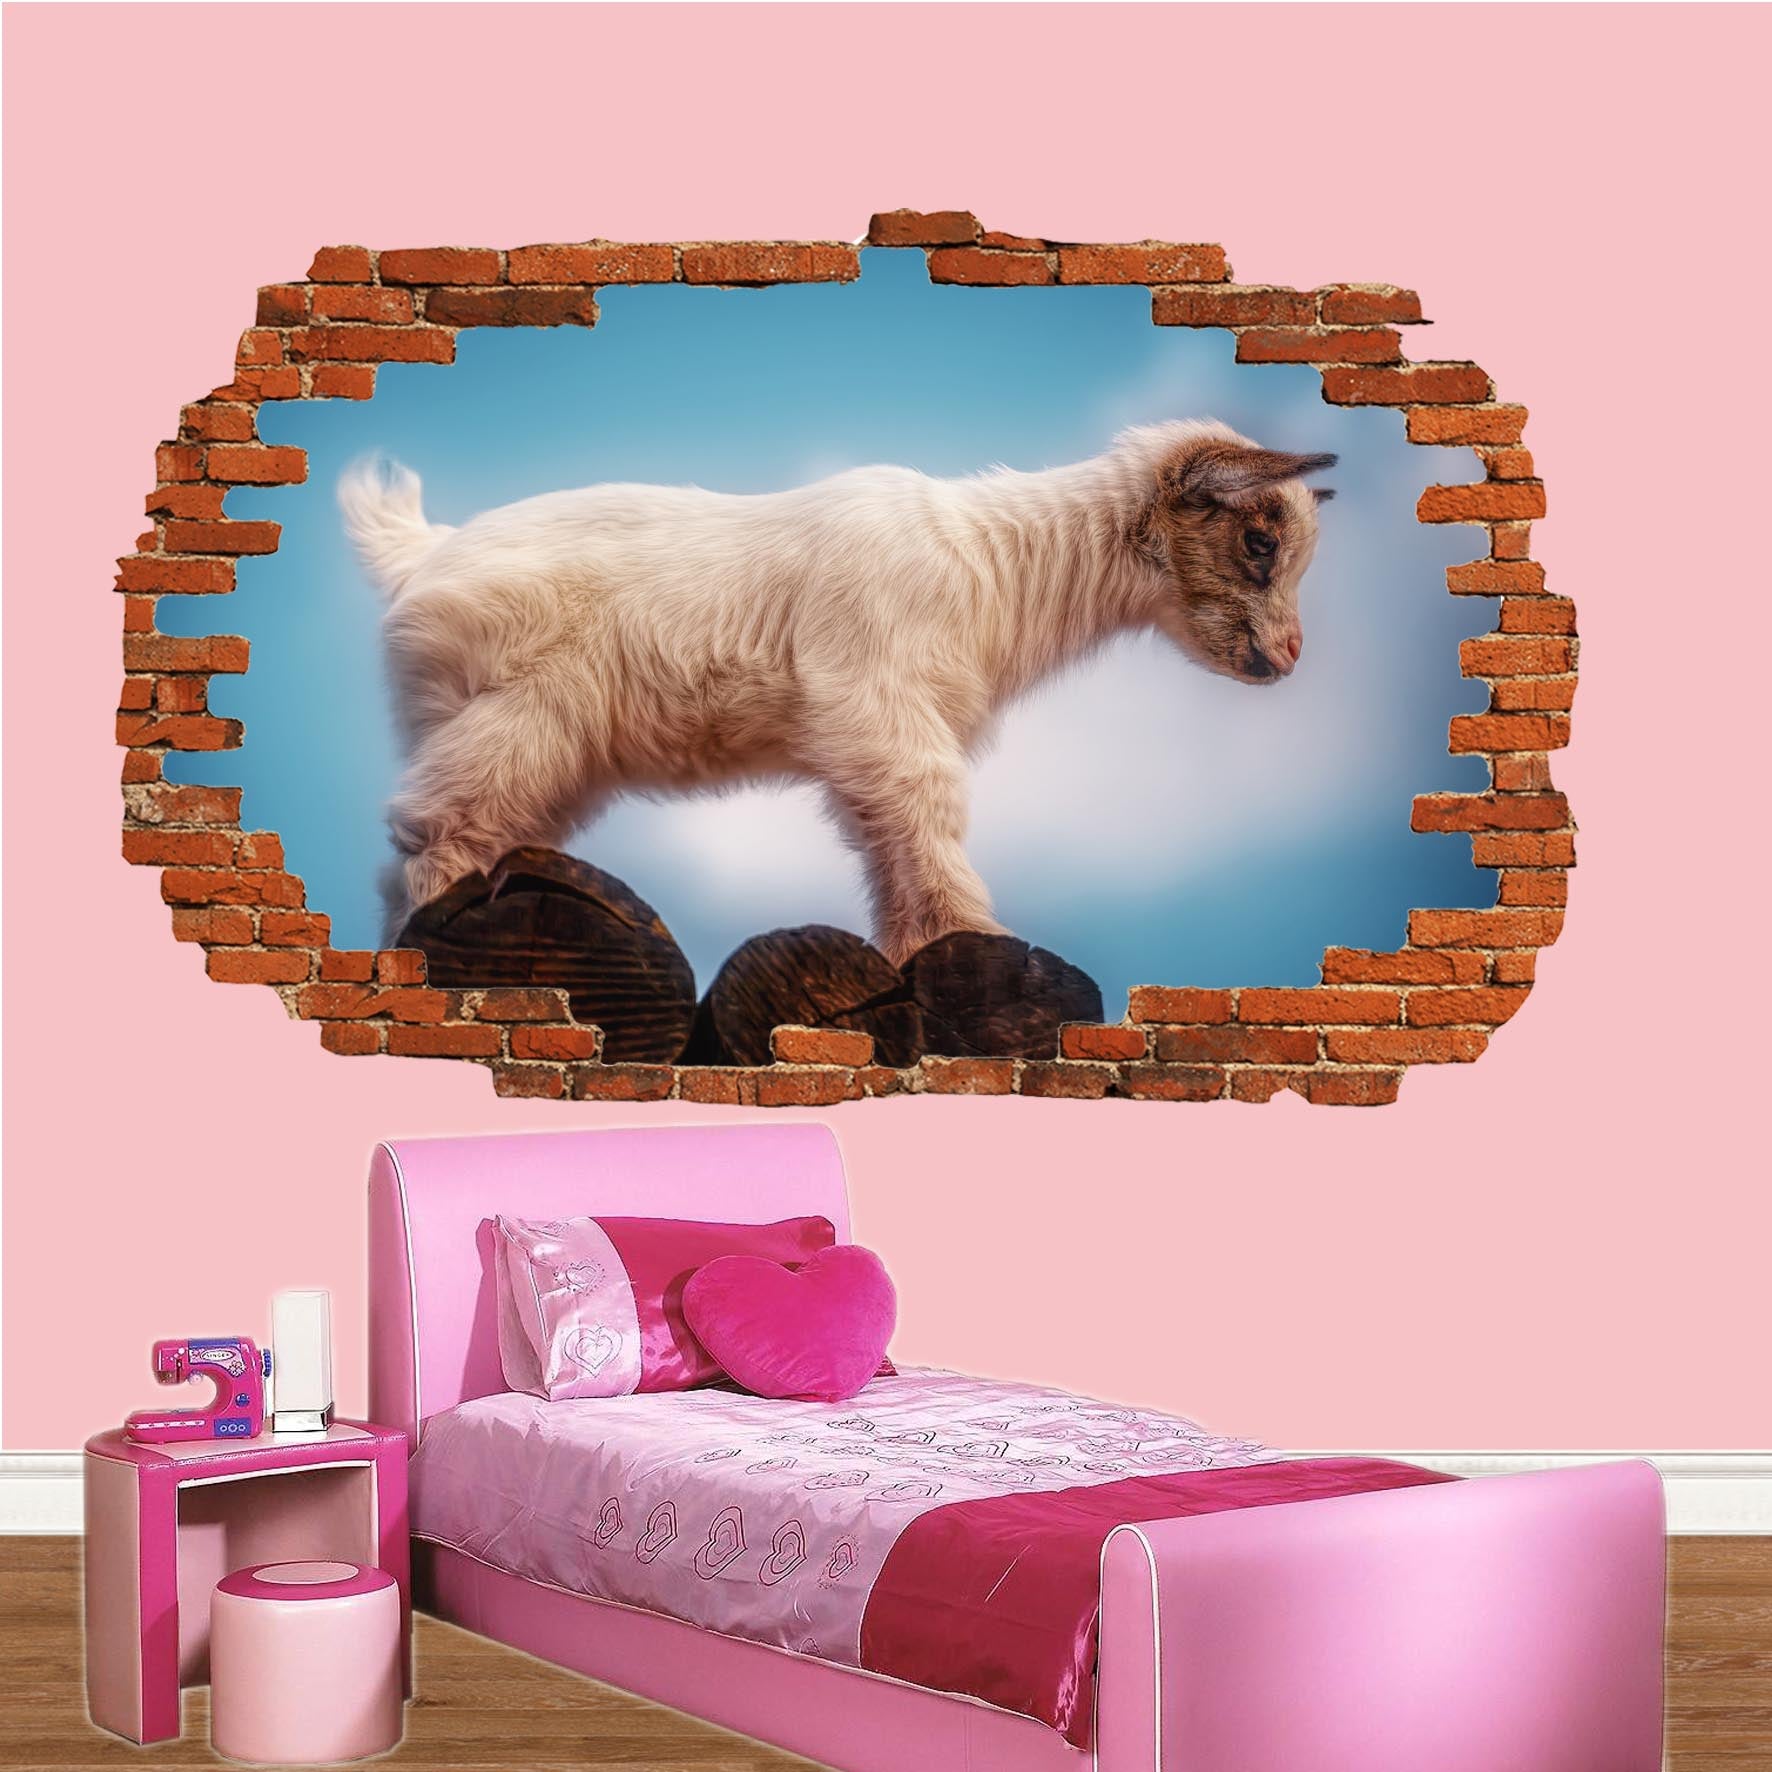 Baby Goat Wall Sticker Poster Decal Mural